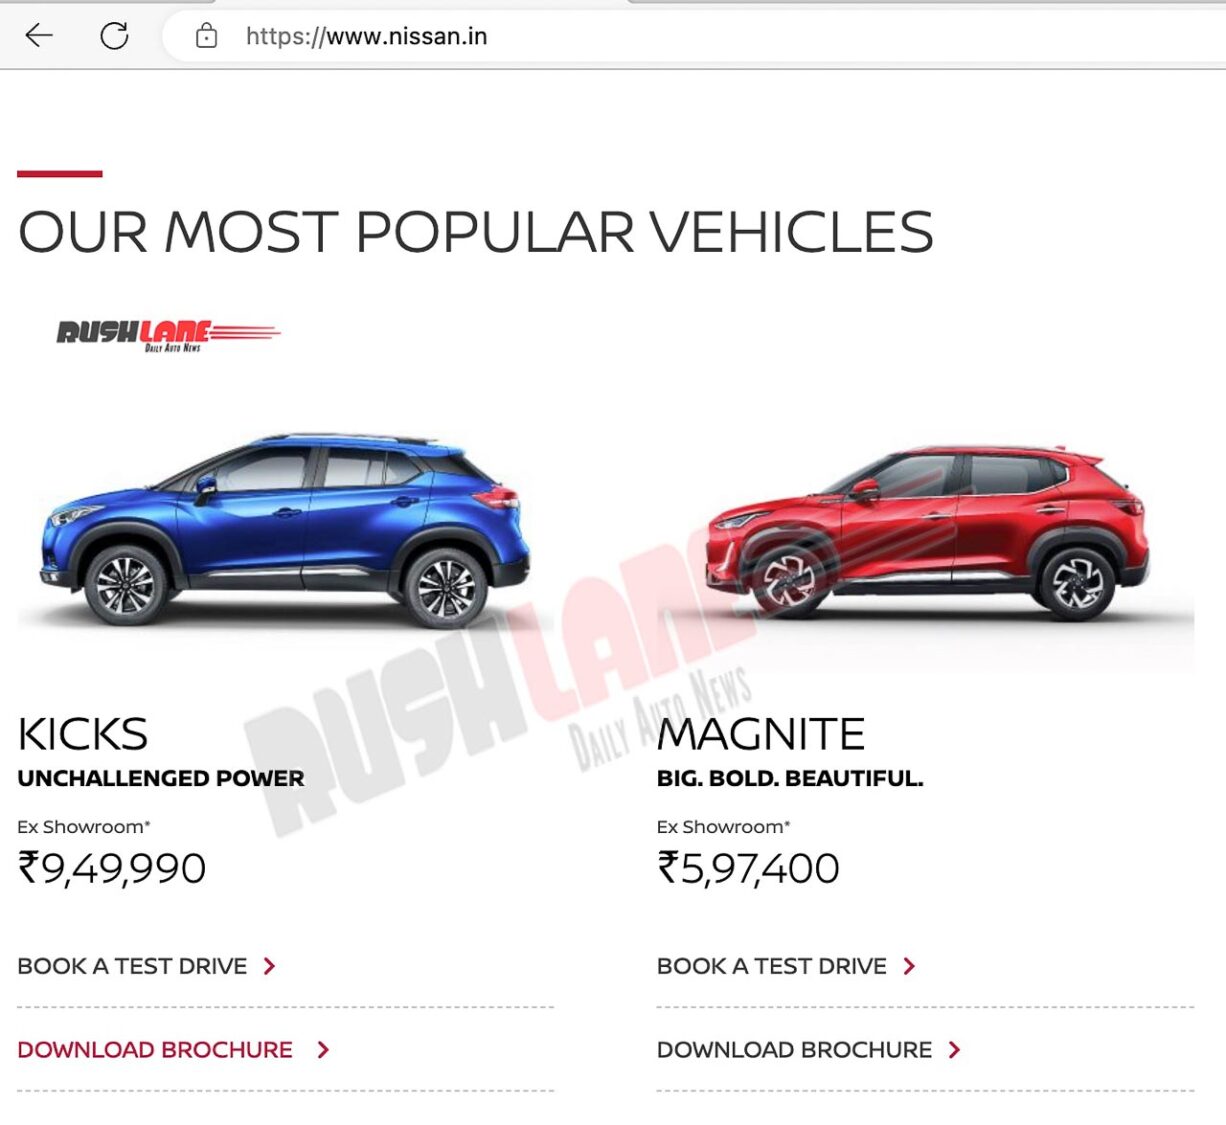 Nissan India range is now down to 2 cars - Kicks and Magnite